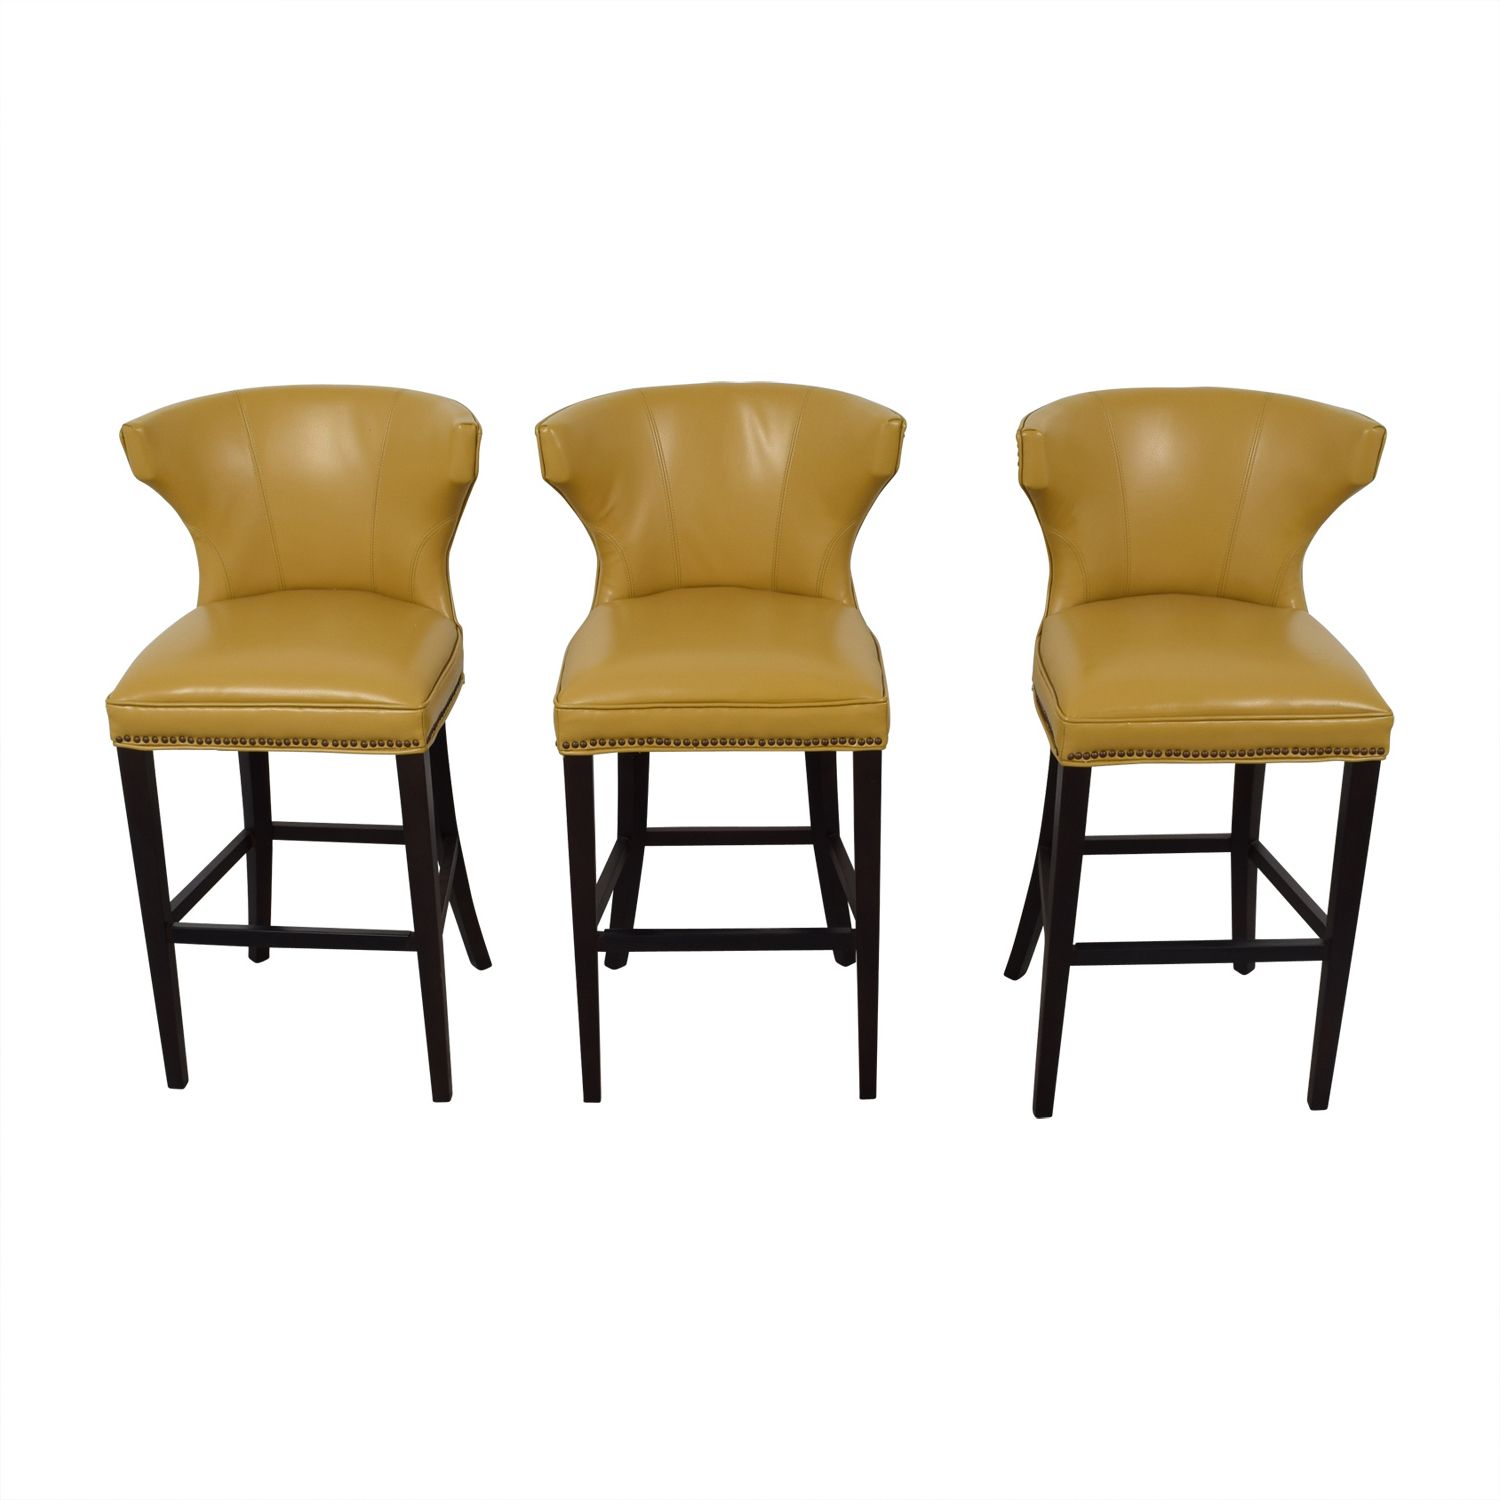 [%72% Off – Grandin Road Grandin Road Mustard Yellow Bar Stools / Chairs Intended For Current Grandin Leather Sofa Chairs|grandin Leather Sofa Chairs Within Trendy 72% Off – Grandin Road Grandin Road Mustard Yellow Bar Stools / Chairs|fashionable Grandin Leather Sofa Chairs Pertaining To 72% Off – Grandin Road Grandin Road Mustard Yellow Bar Stools / Chairs|widely Used 72% Off – Grandin Road Grandin Road Mustard Yellow Bar Stools / Chairs For Grandin Leather Sofa Chairs%] (View 14 of 20)